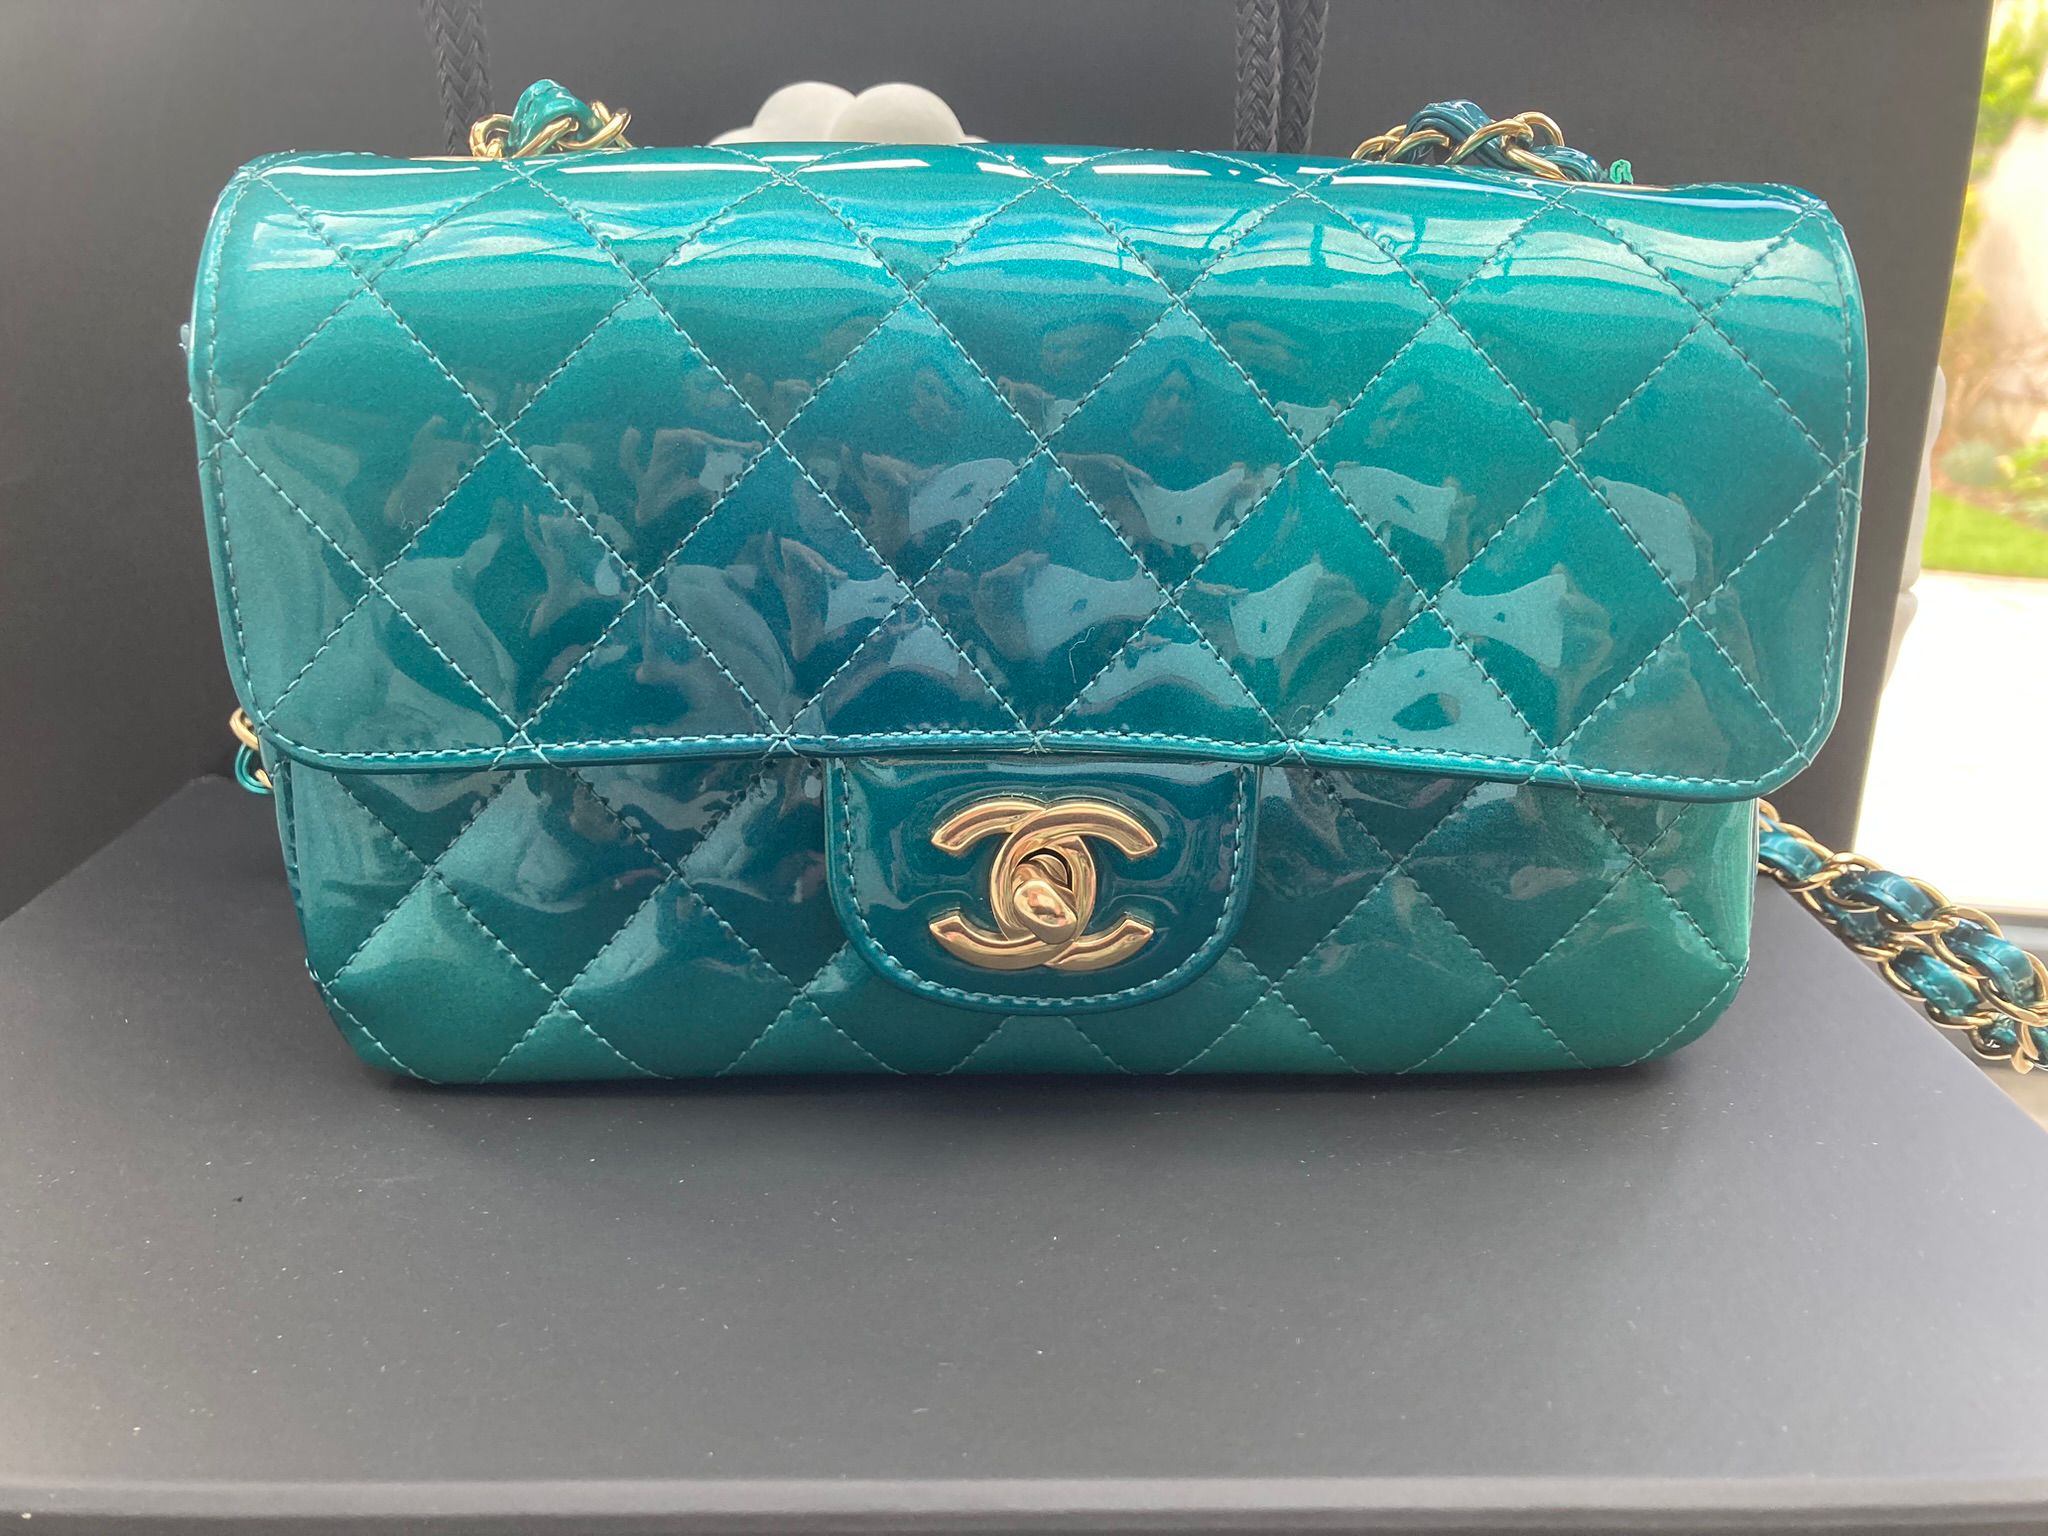 Chanel Mini Rectangular Flap Bag with Top Handle Green Ombre